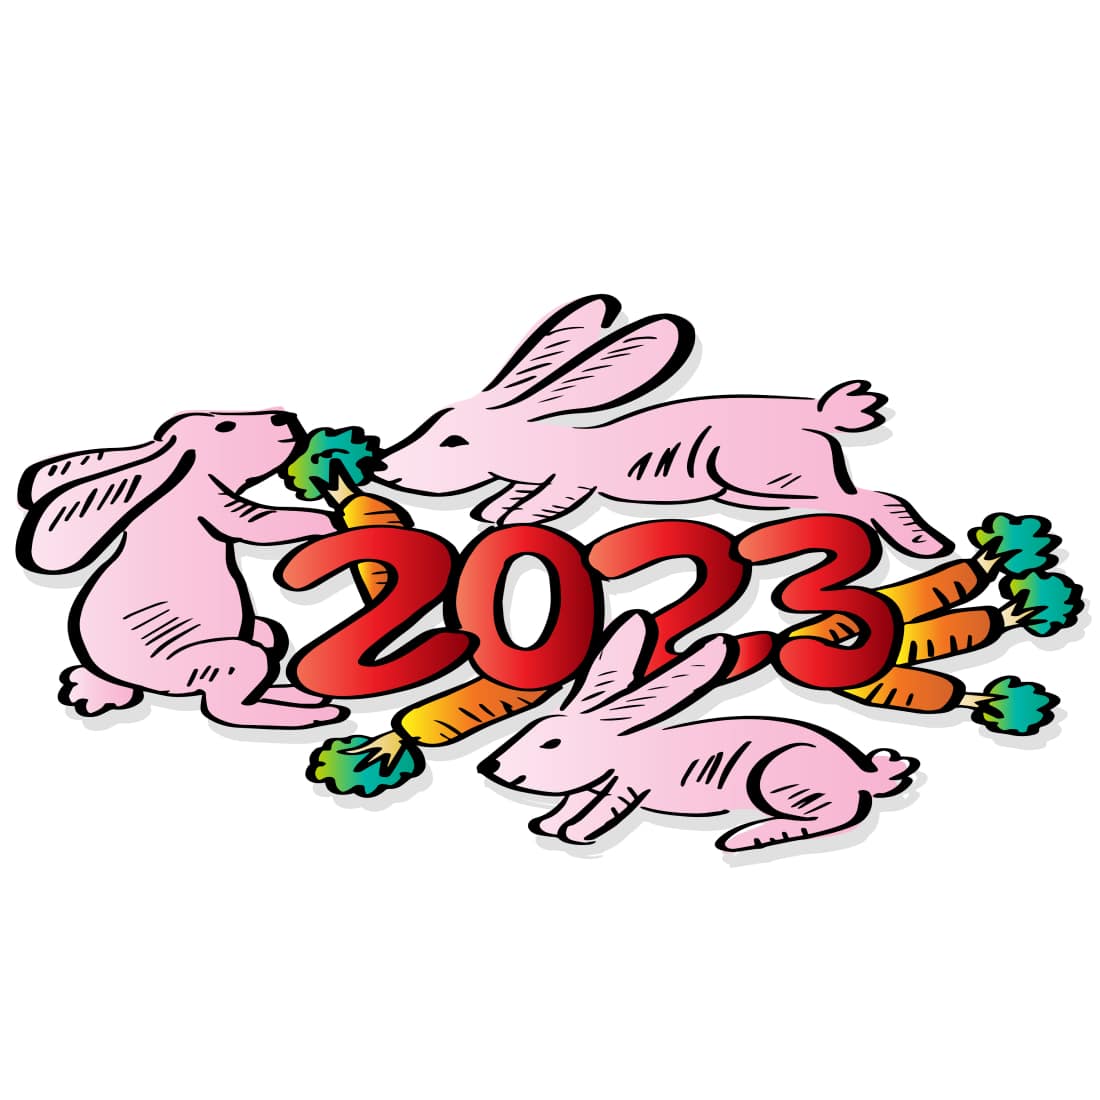 New Year 2023 Greeting Card with Rabbits Design cover image.